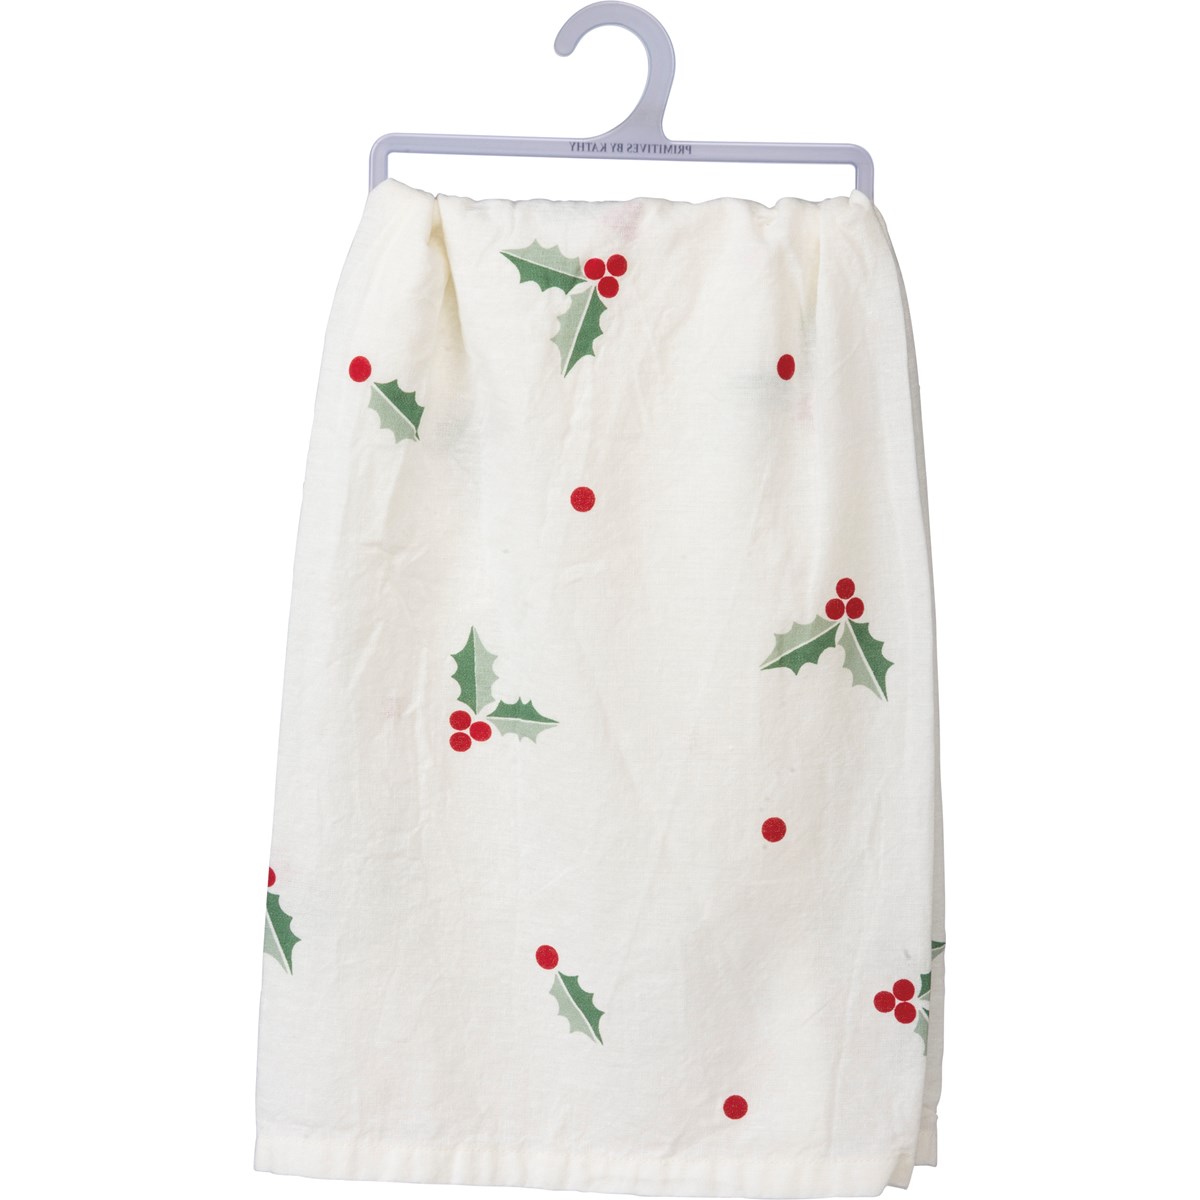 Have Yourself A Merry Christmas Holly Kitchen Towel - Cotton